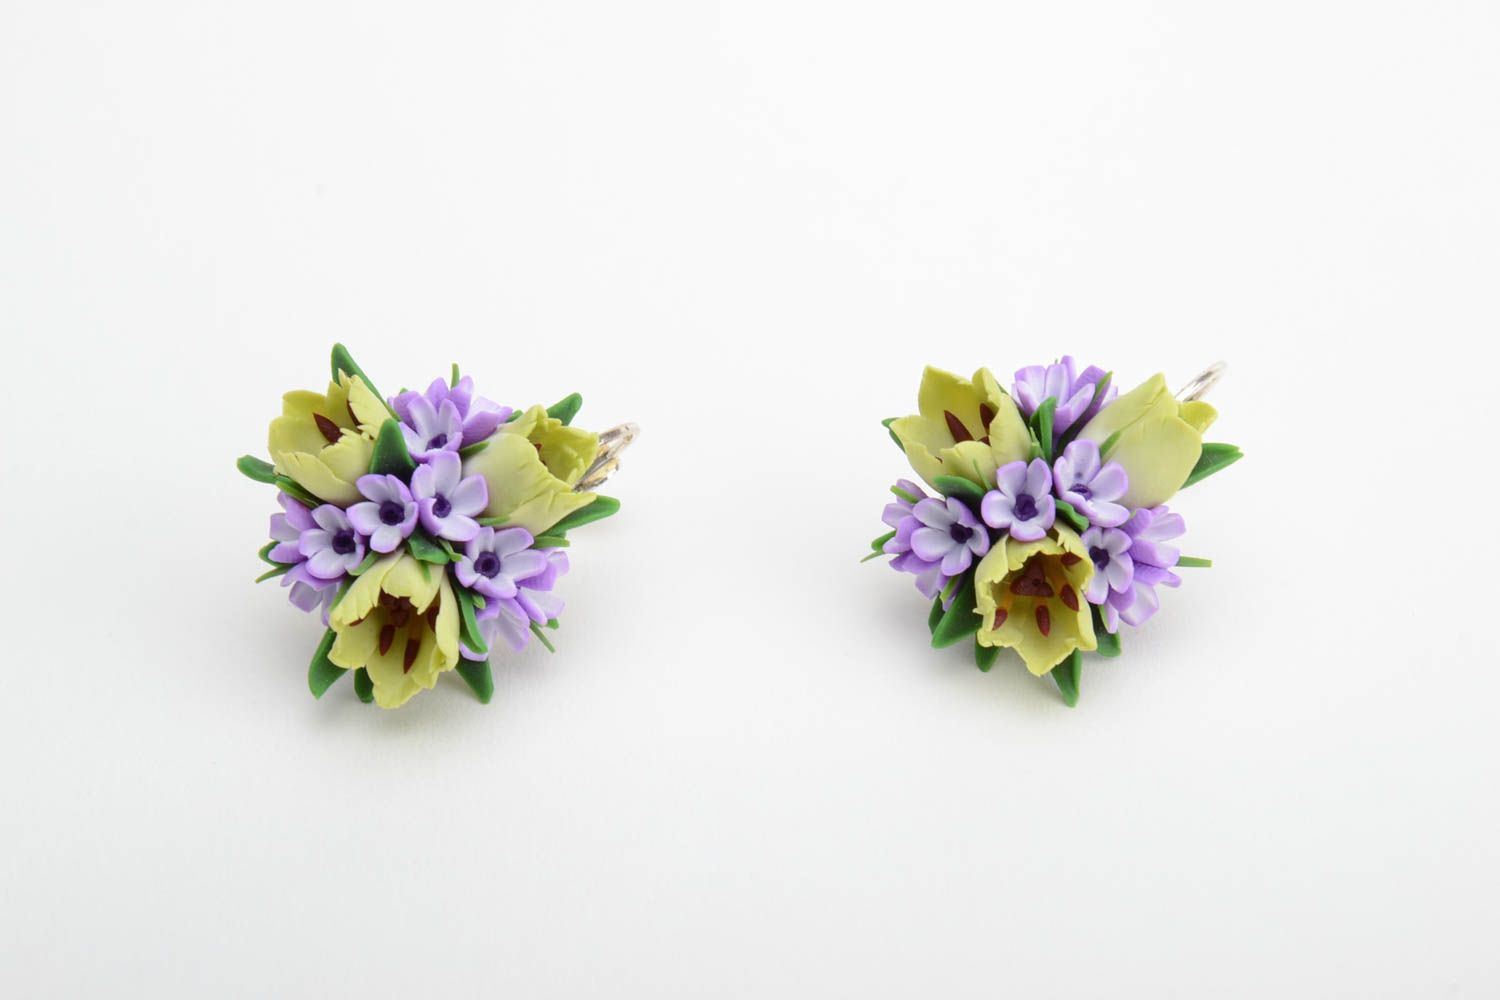 Handmade festive earrings with violet and green polymer clay floral compositions photo 2